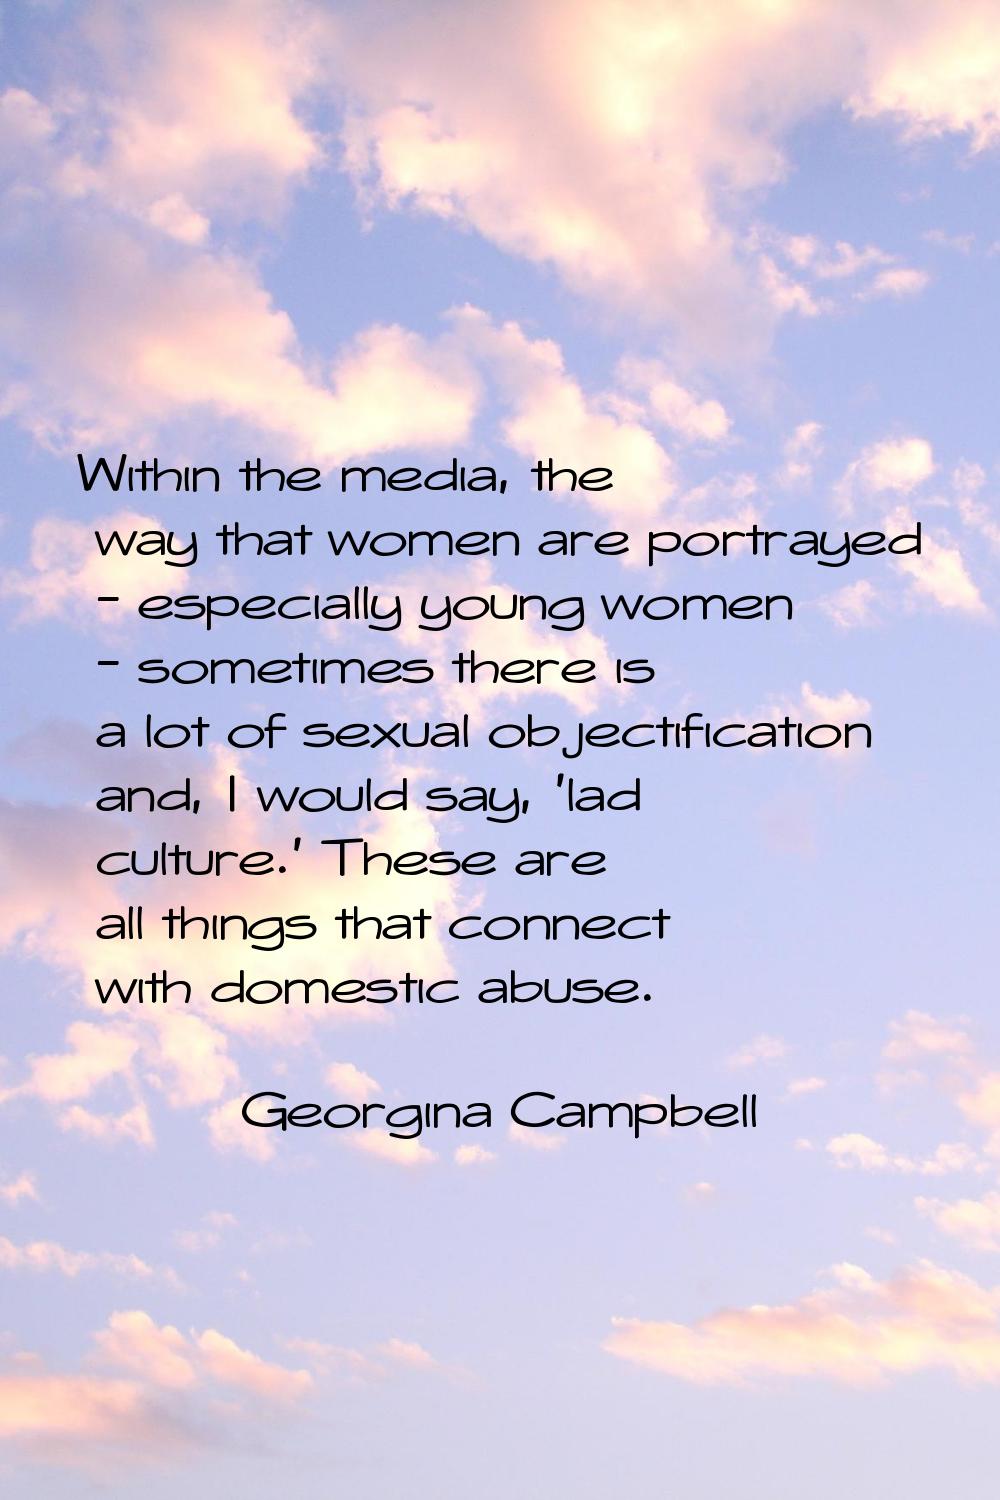 Within the media, the way that women are portrayed - especially young women - sometimes there is a 